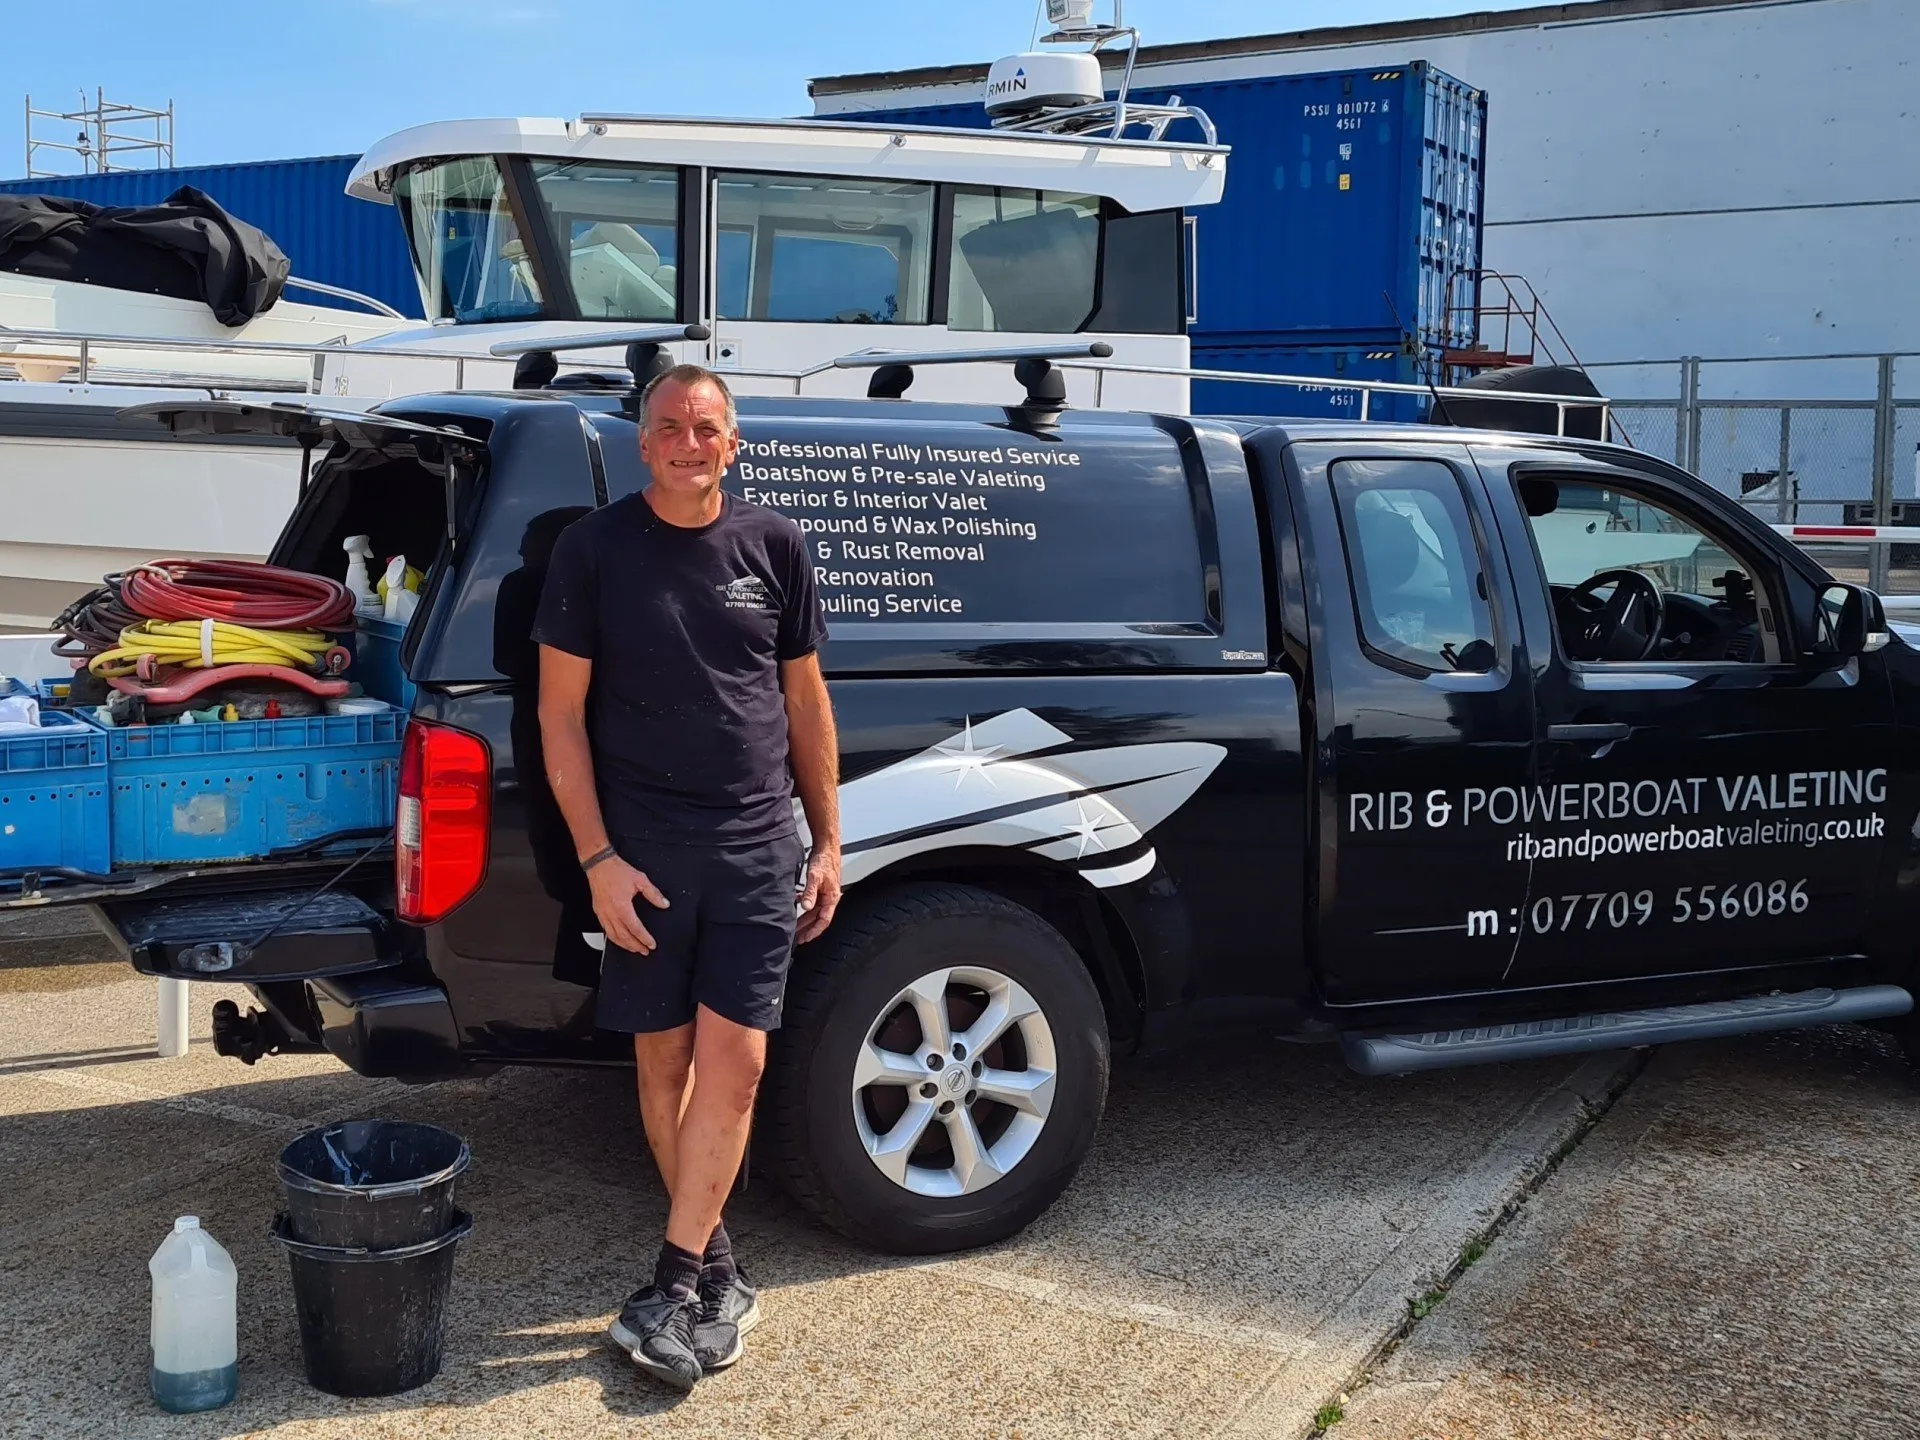 Simon owner of rib and powerboat valeting next to his truck